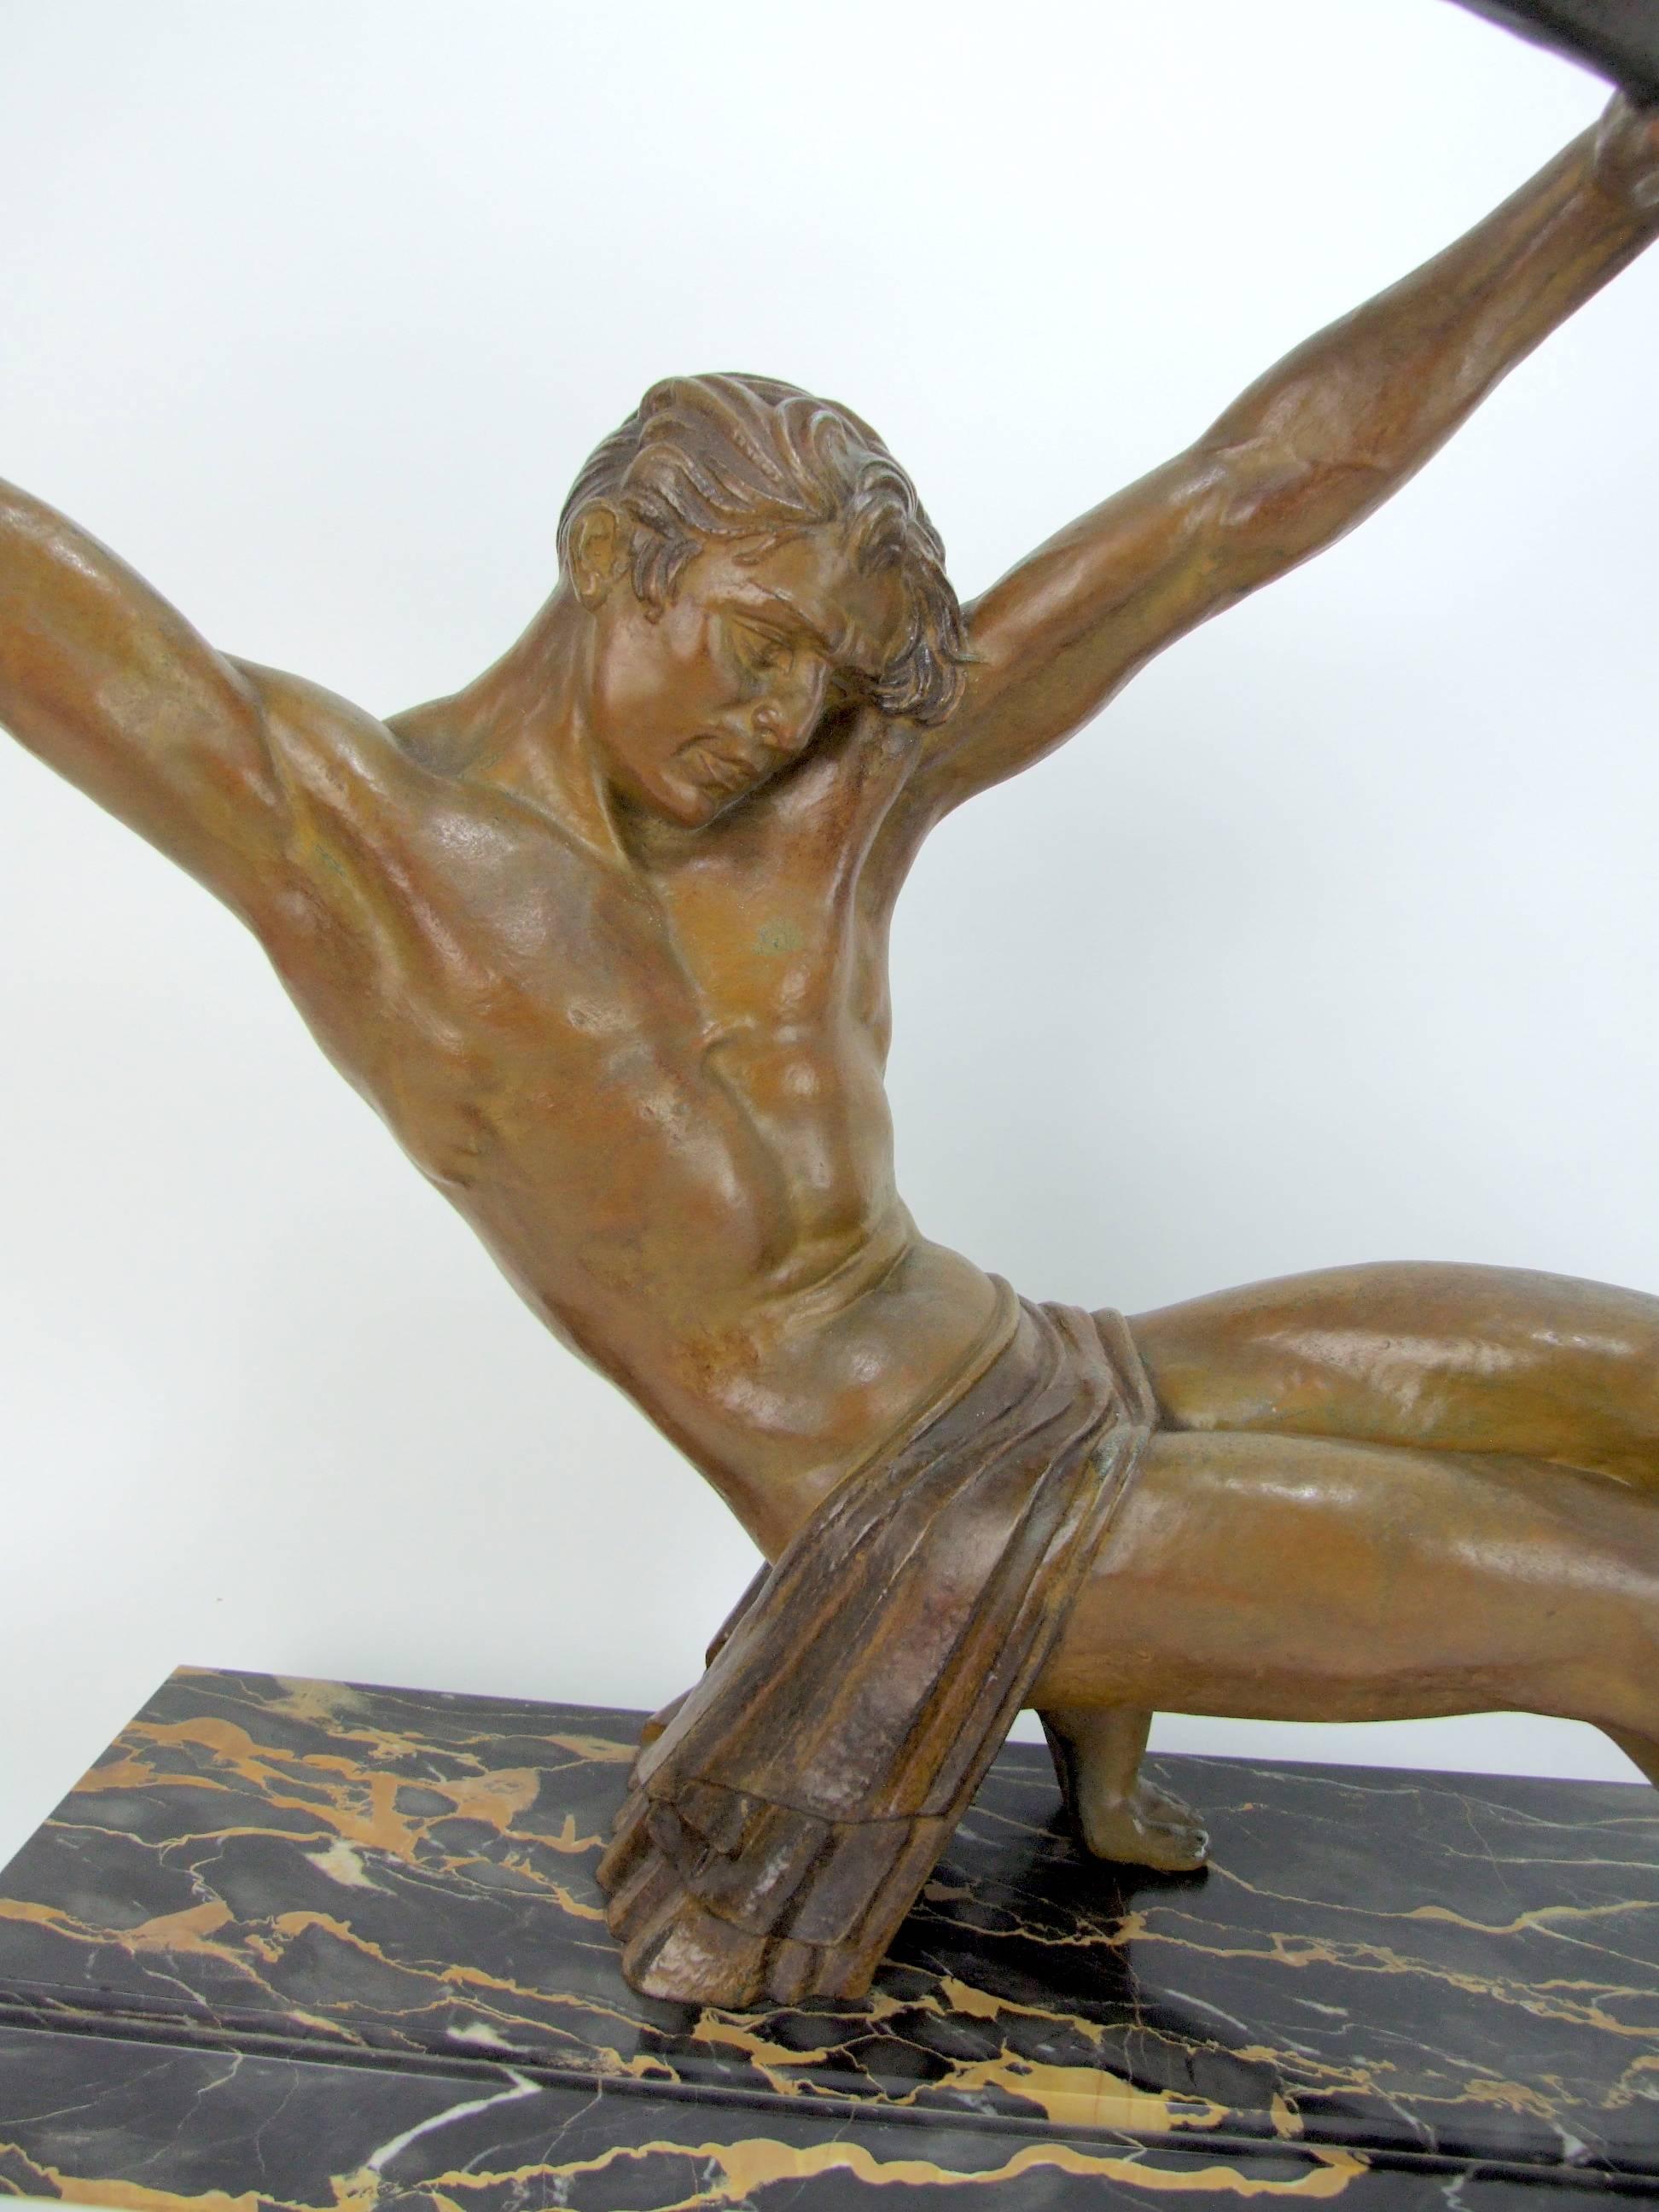 Large French Art Deco spelter male statue by Demetre Chiparus. This is the largest version of this statue and it measures 30 inches long by 6.5 inches deep by 24 inches high (76cm x 16.5cm x 61cm). Signed to the right hand end of the base - D H